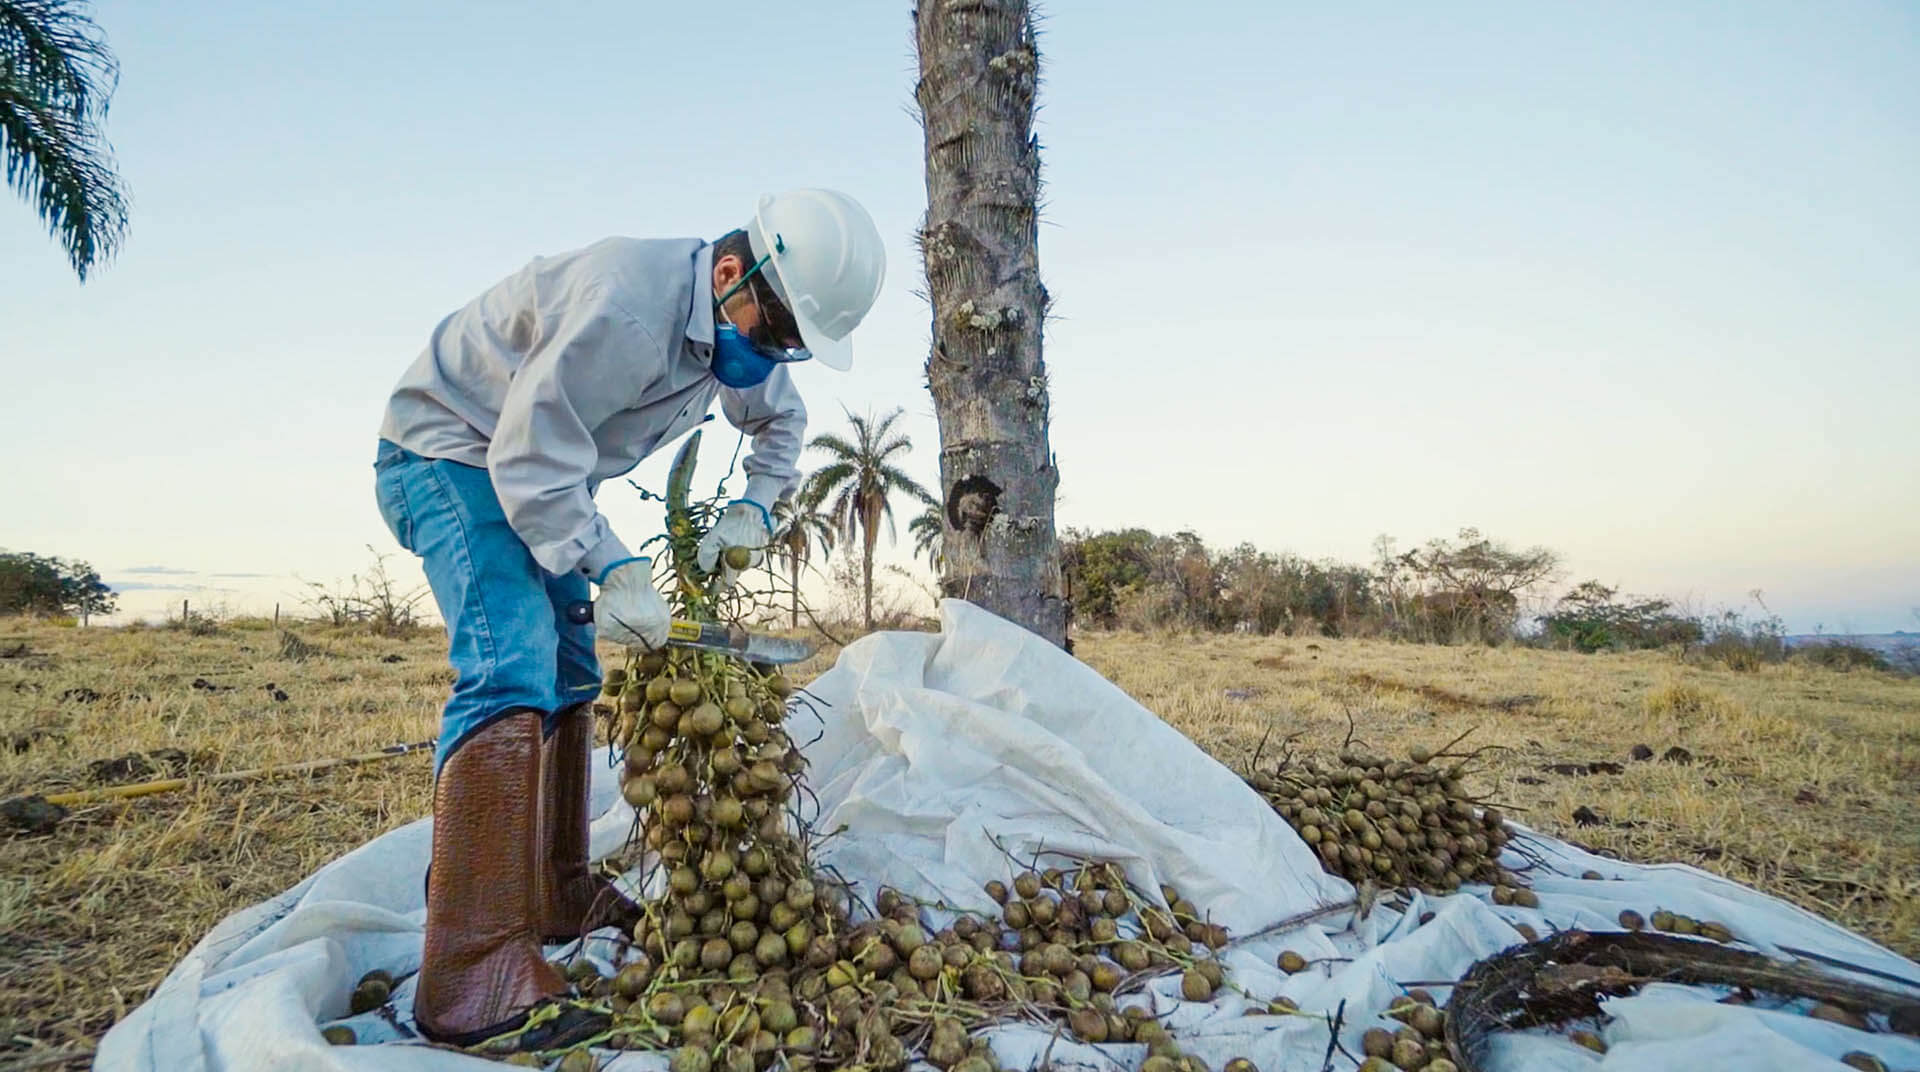 A Brazilian man in a hardhat harvests the palm nuts using a knife